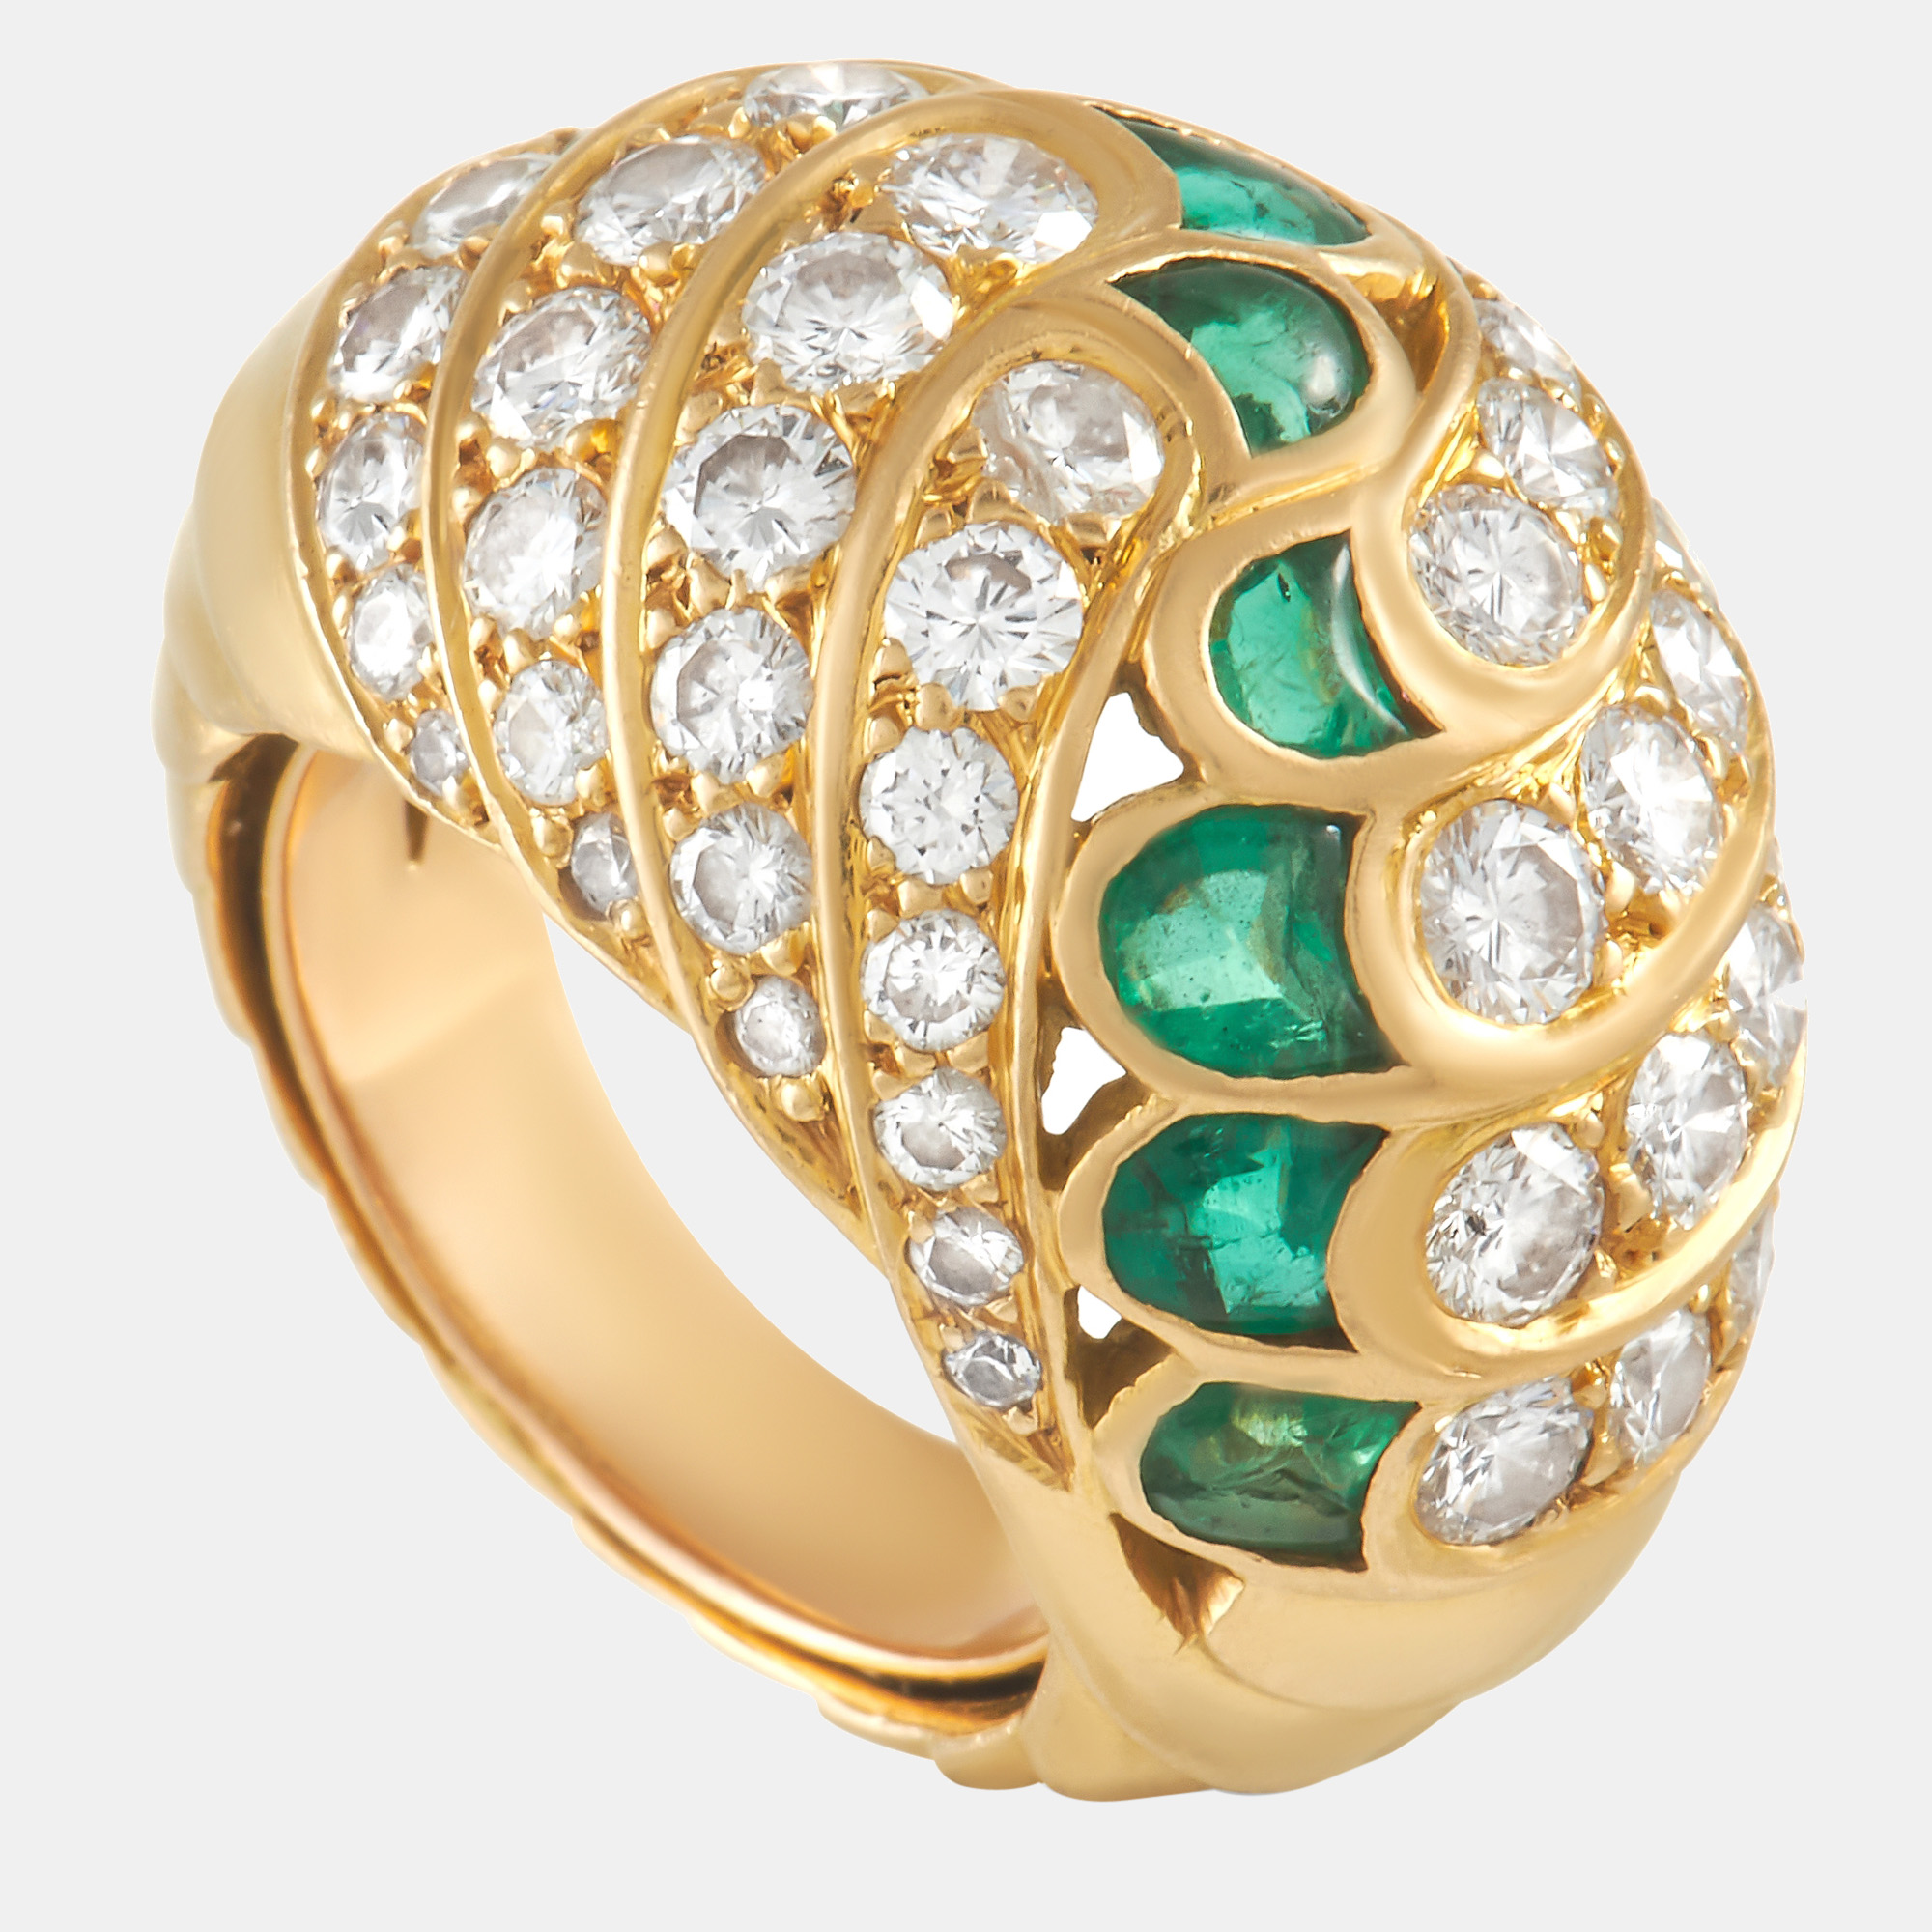 Pre-owned Piaget 18k Yellow Gold 2.25 Ct Diamond And Emerald Ring